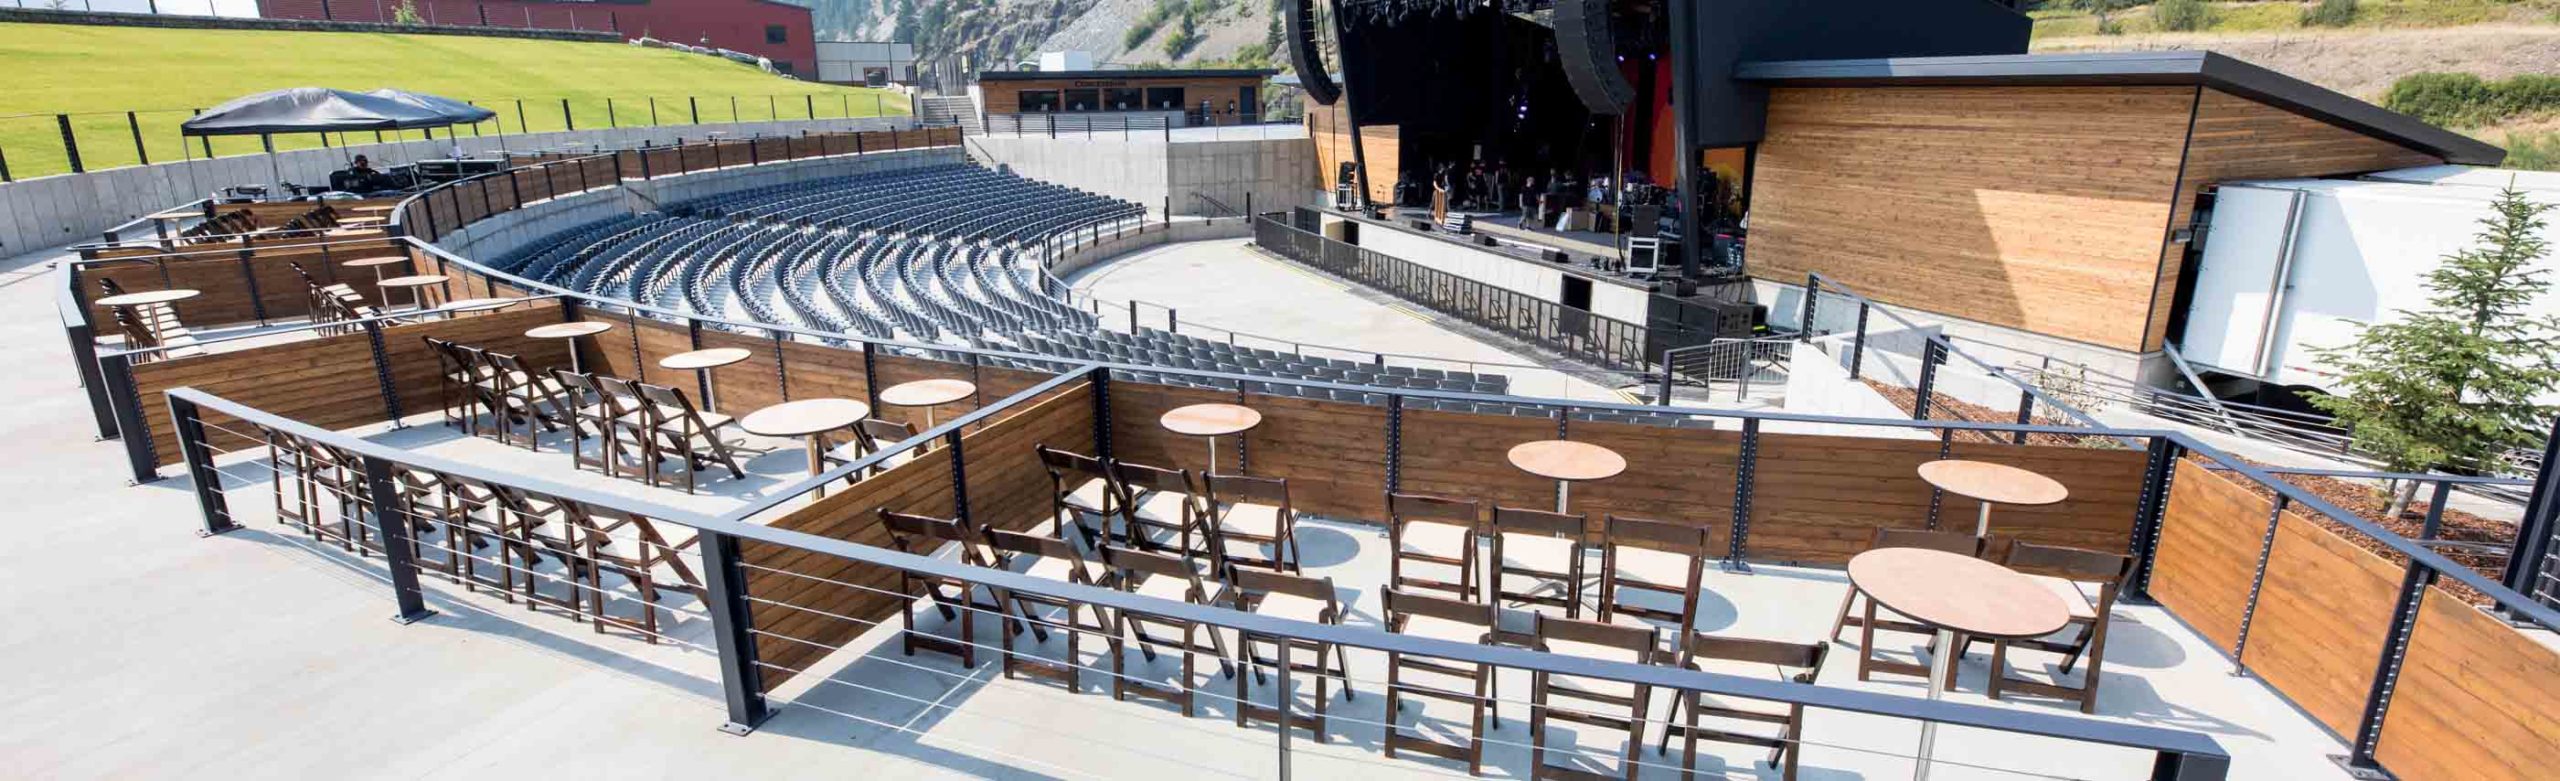 SPECIAL OFFER: Greensky Bluegrass Box Seats Released Image